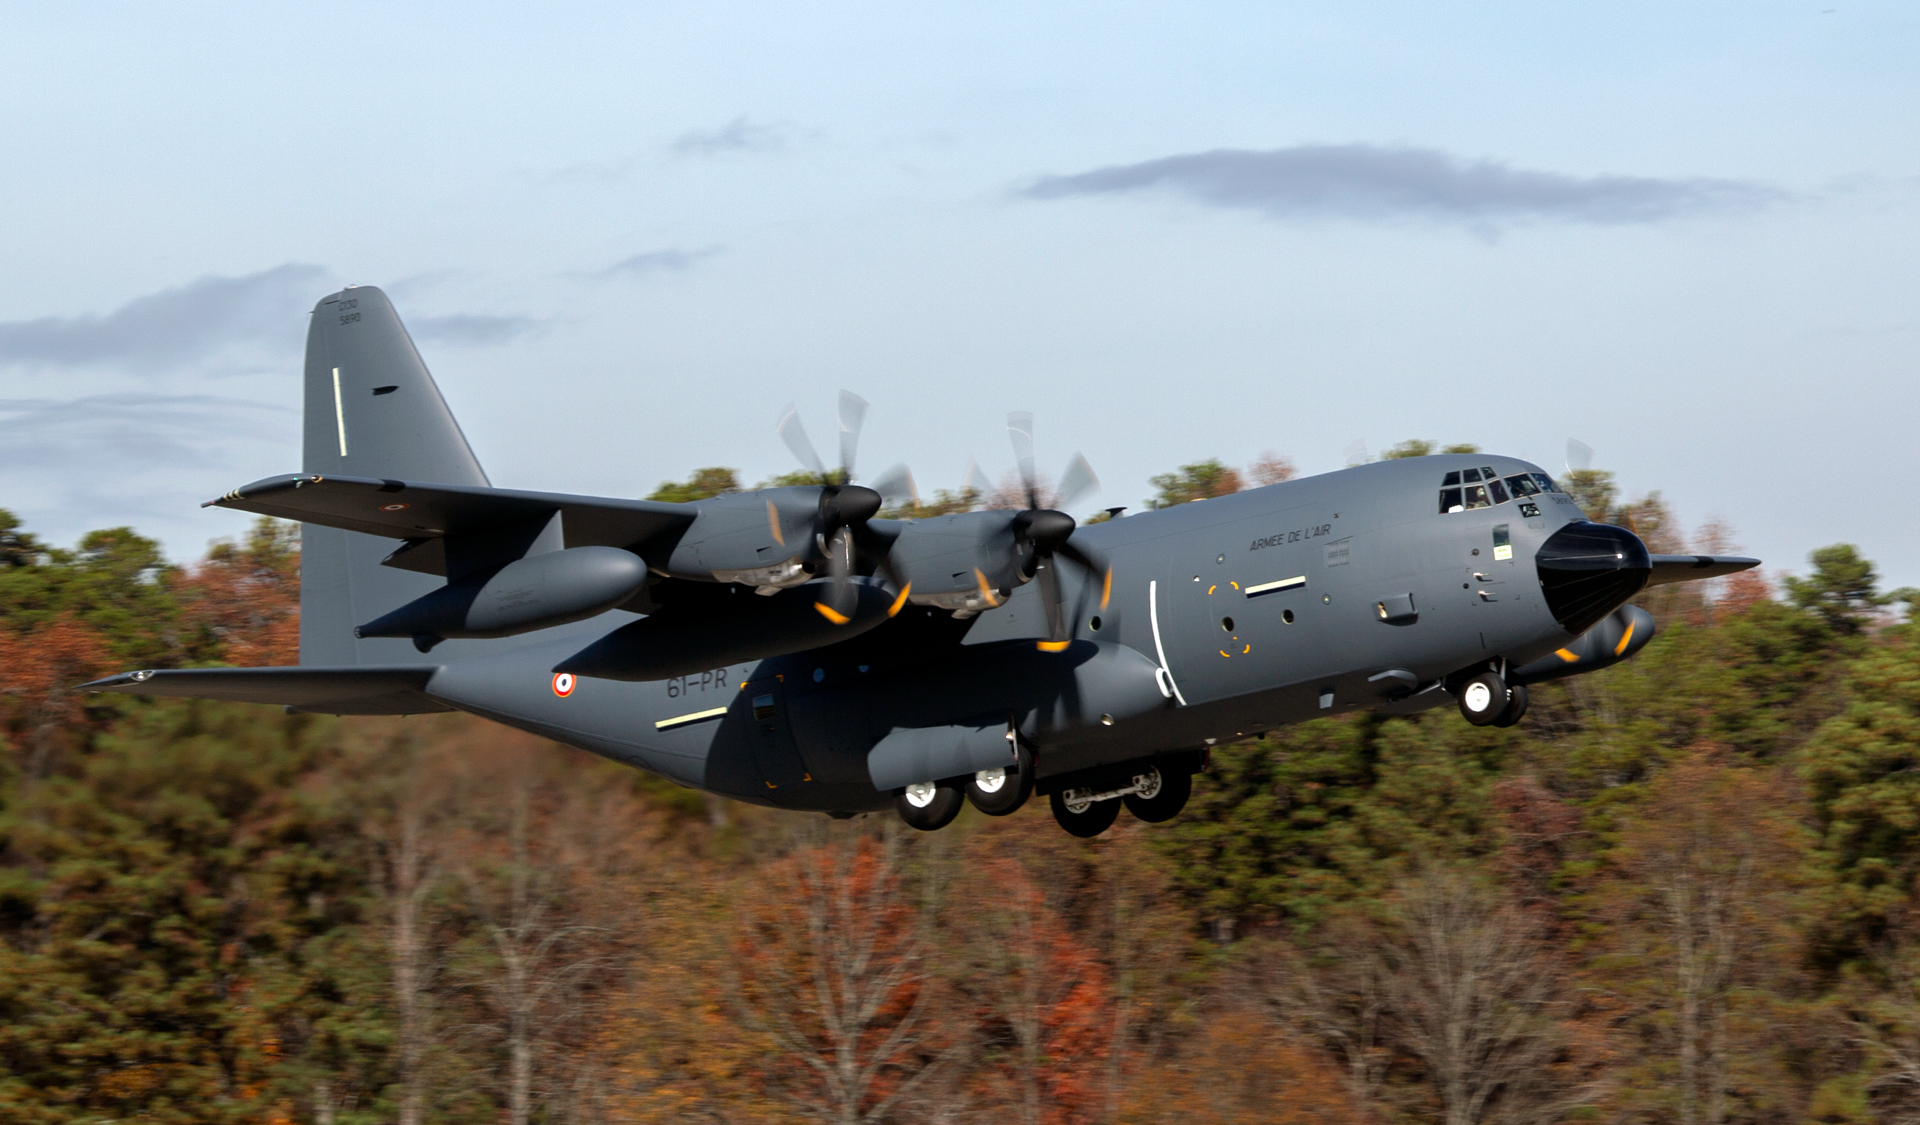 France’s second KC-130J Super Hercules aerial refueler takes off from Lockheed Martin’s facility in Marietta, Georgia, upon delivery in 2019. (Photo by Lockheed Martin)